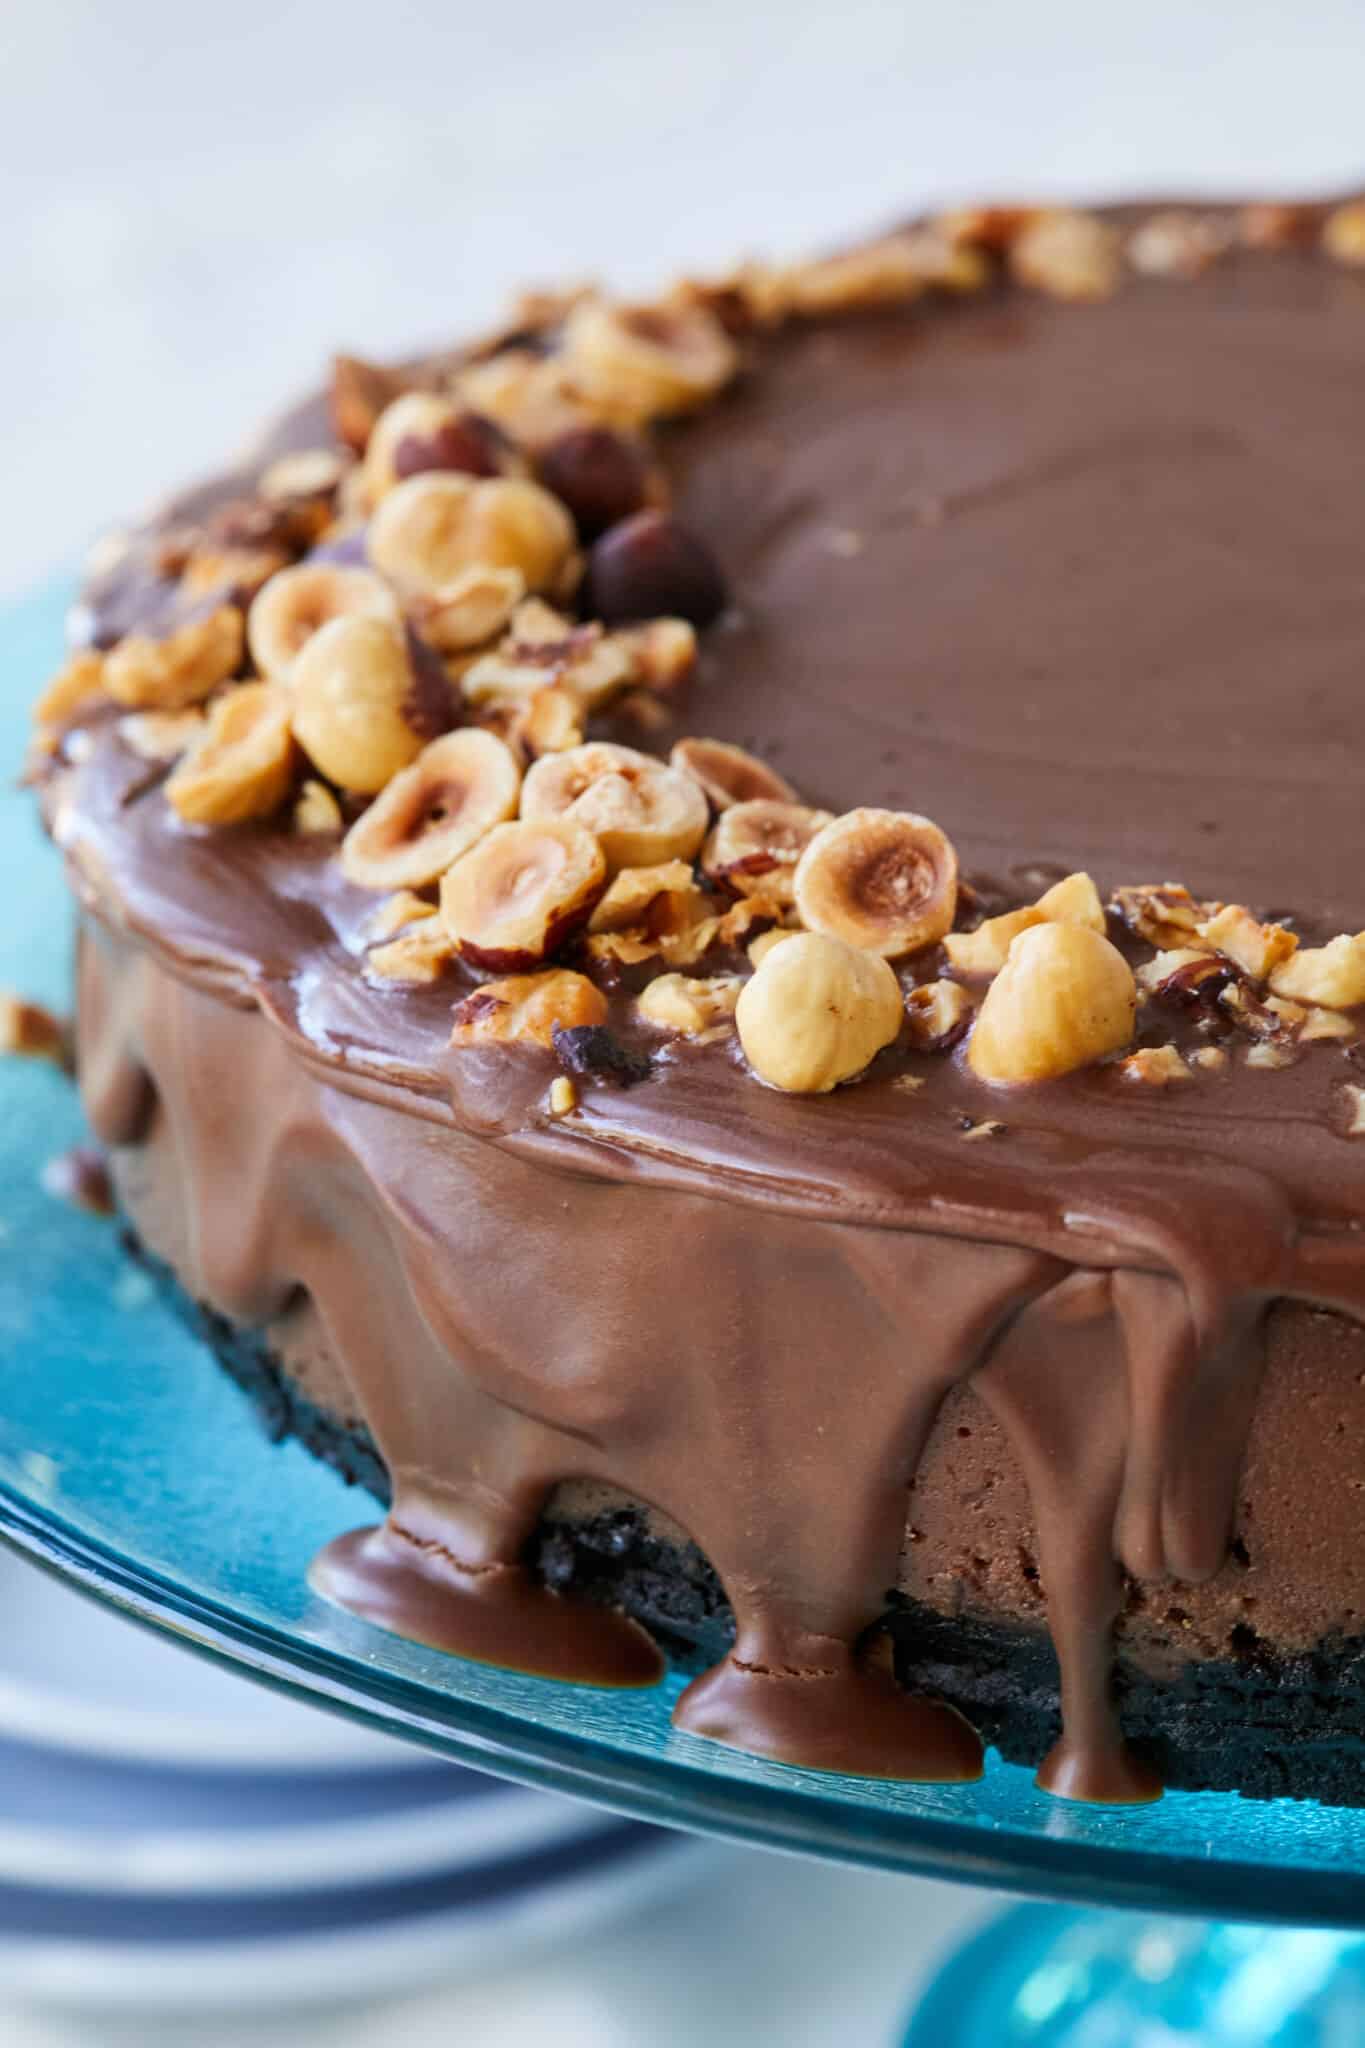 Heavenly Nutella Cheesecake is coated with silky smooth ganache and topped with crunchy toasted hazelnuts. 